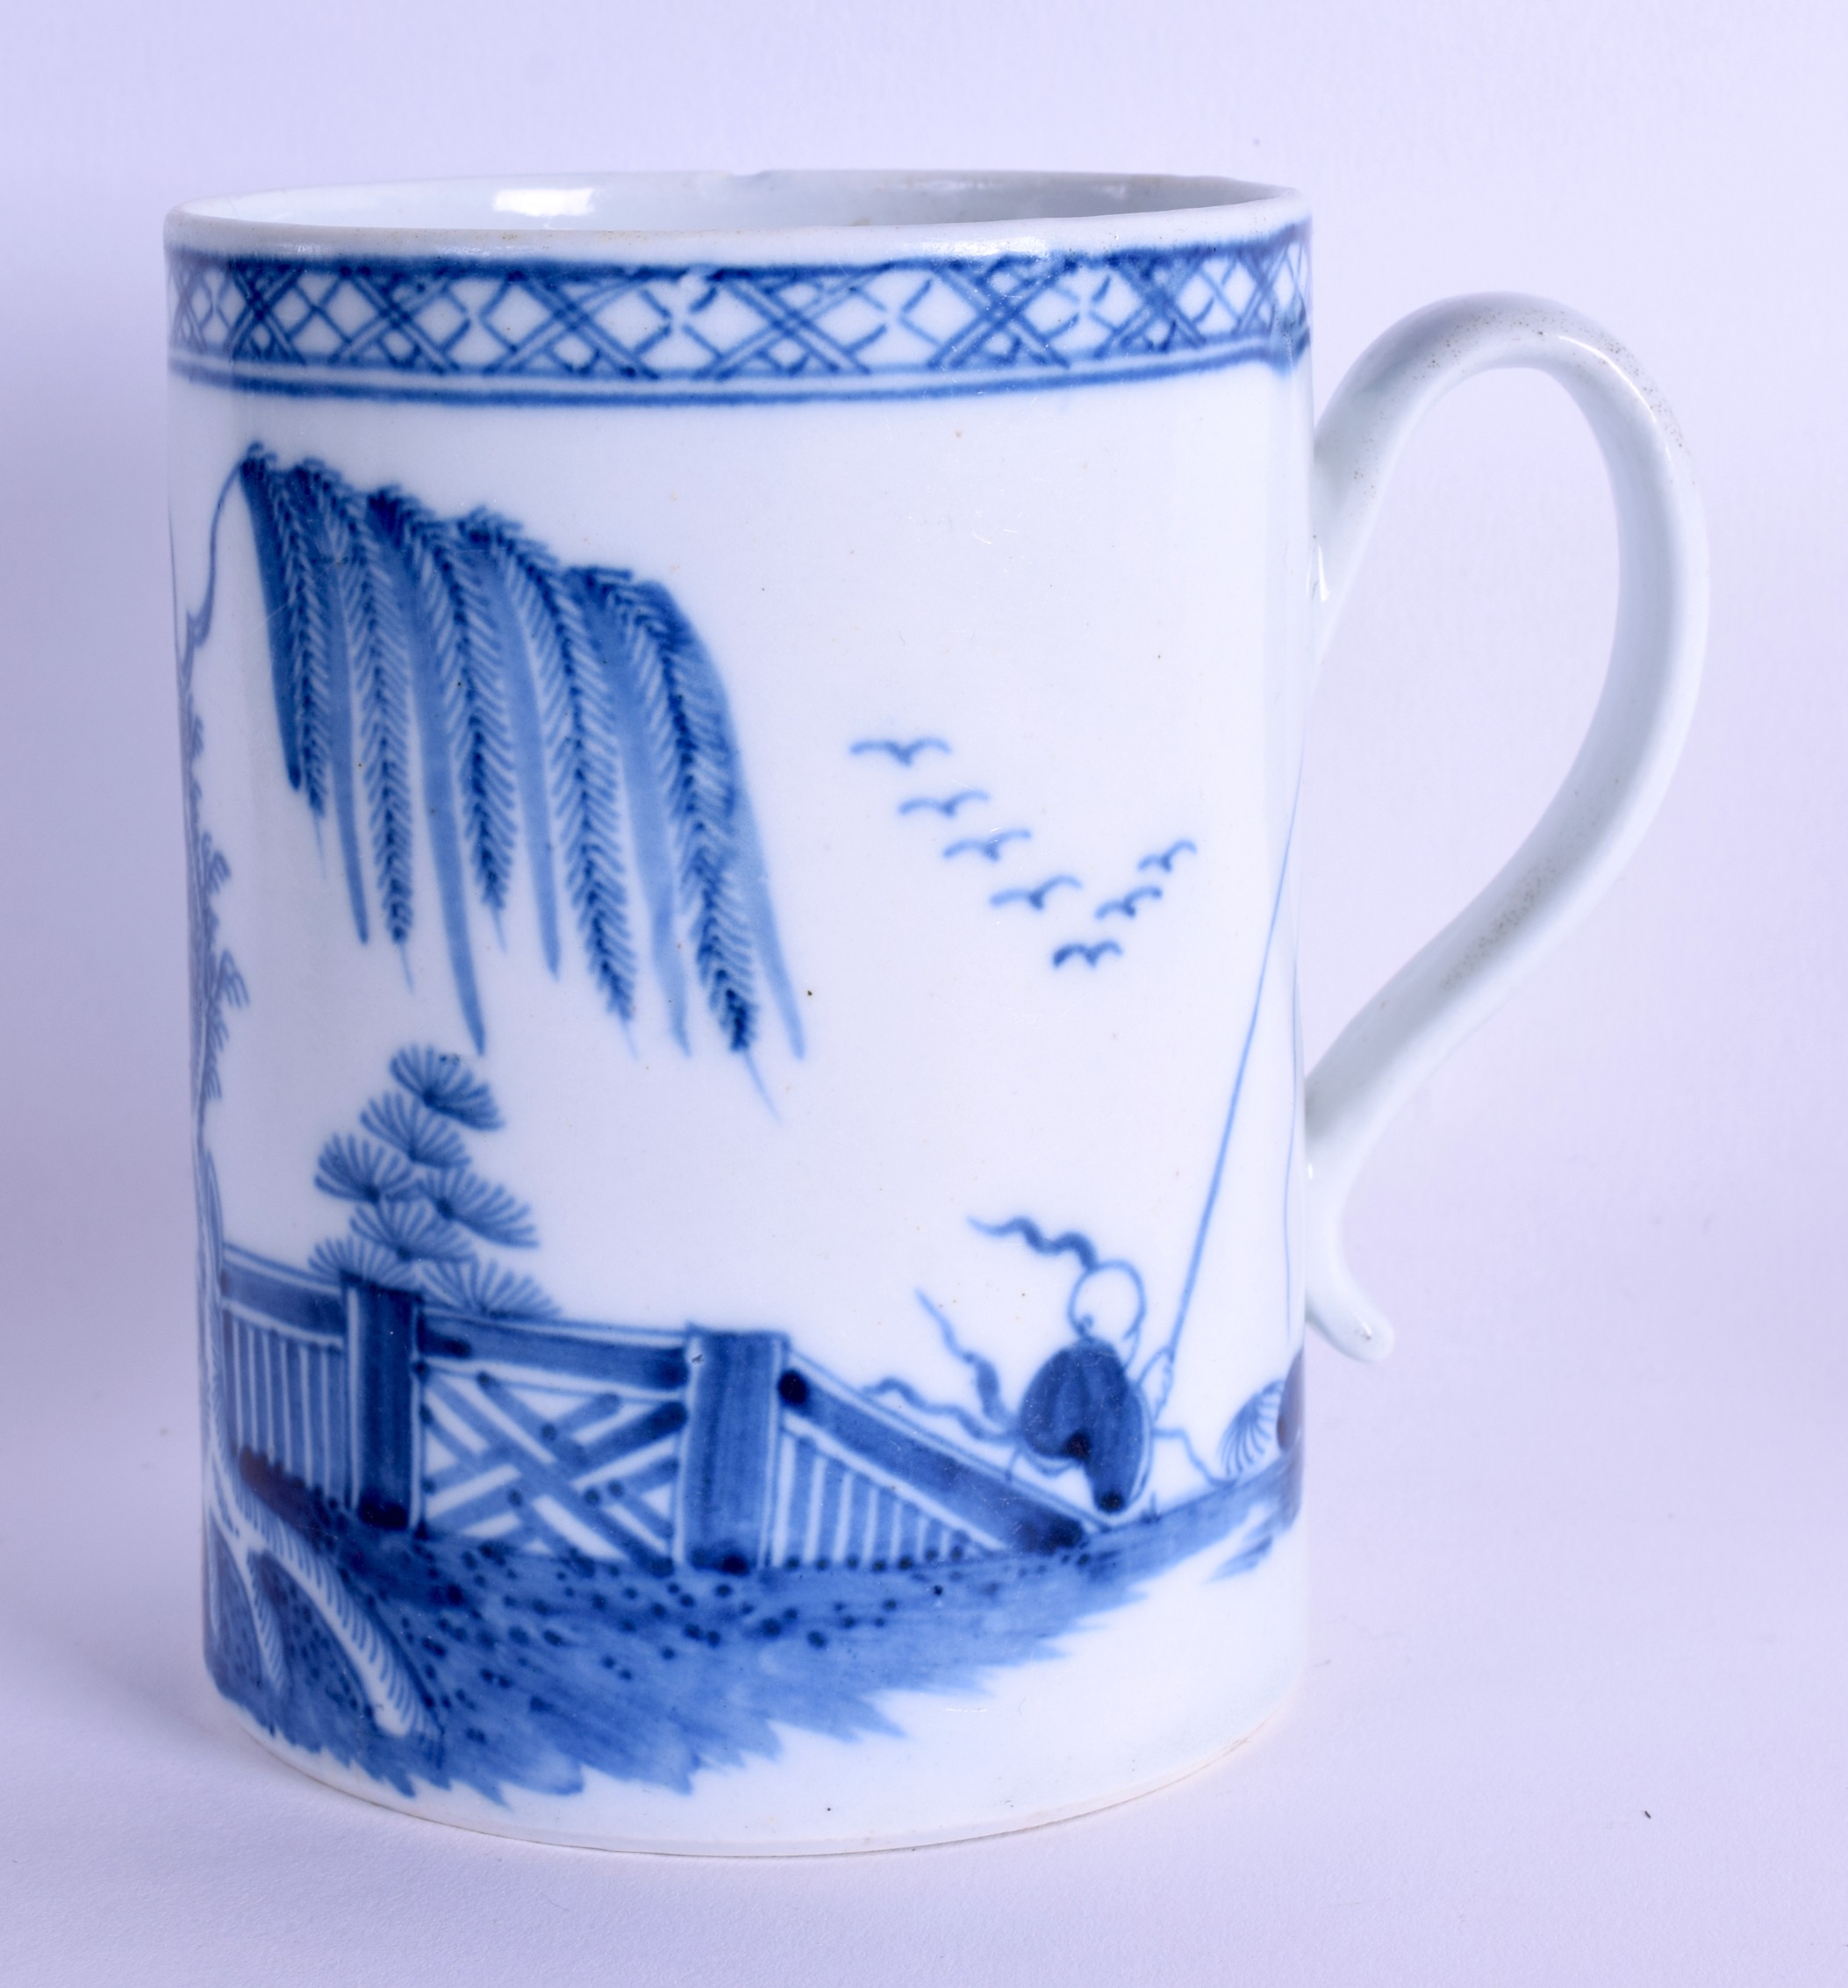 18th c. mug painted in under glaze blue with a fisherman beside a fence and willow probably Chaffers